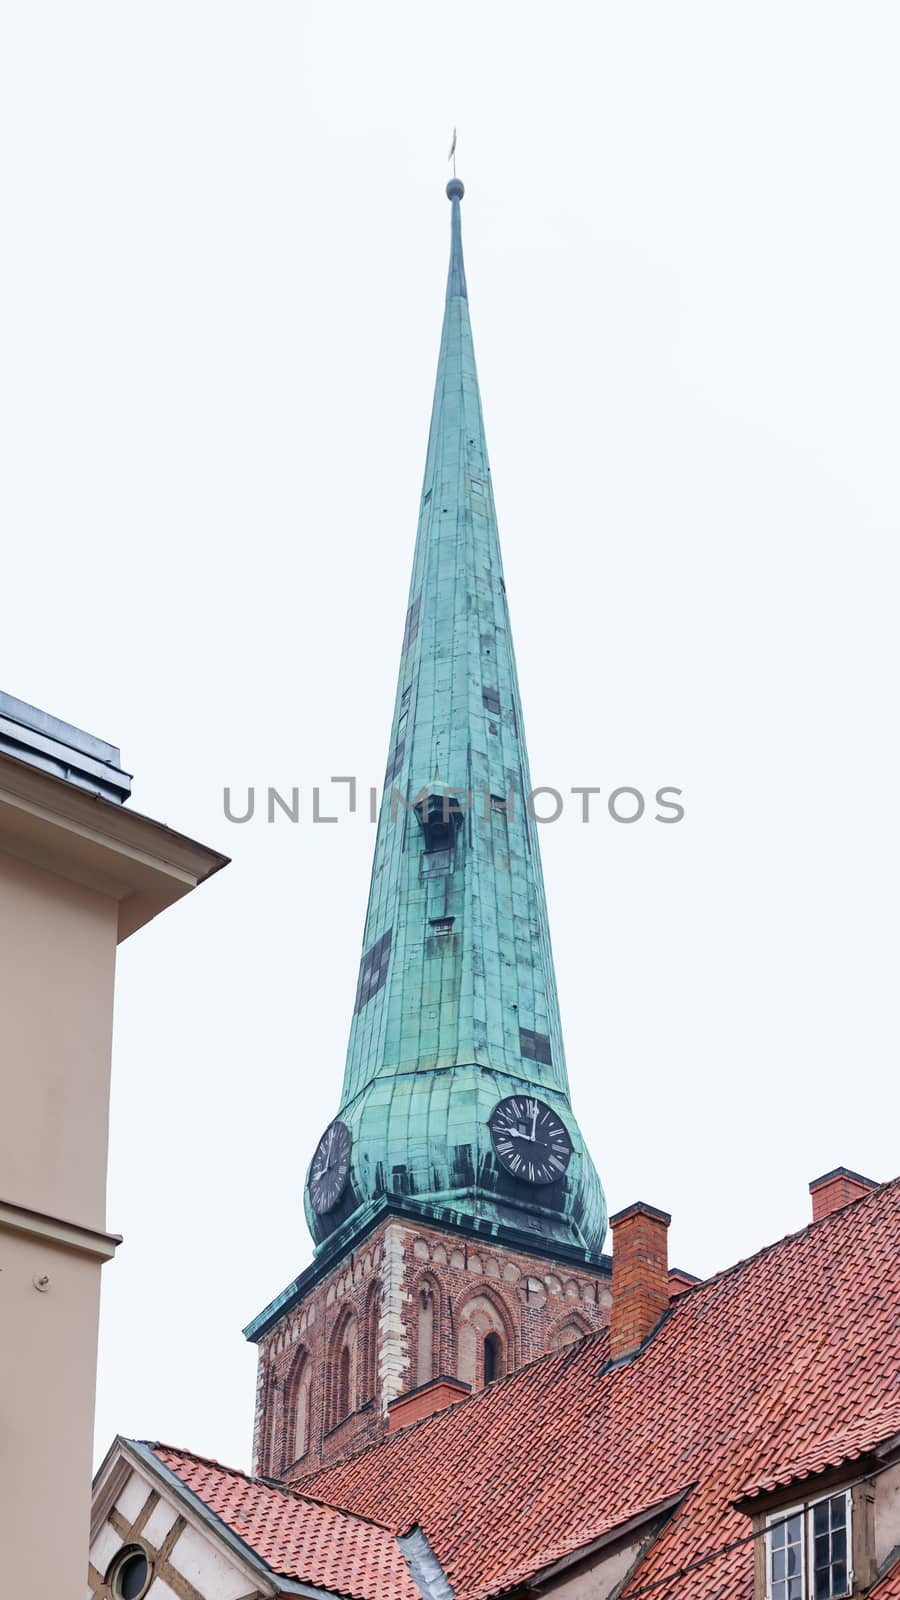 The view across rooftops looking towards St Peter's Church in Riga, Latva.  In 1997 the church was included as a UNESCO world heritage site.